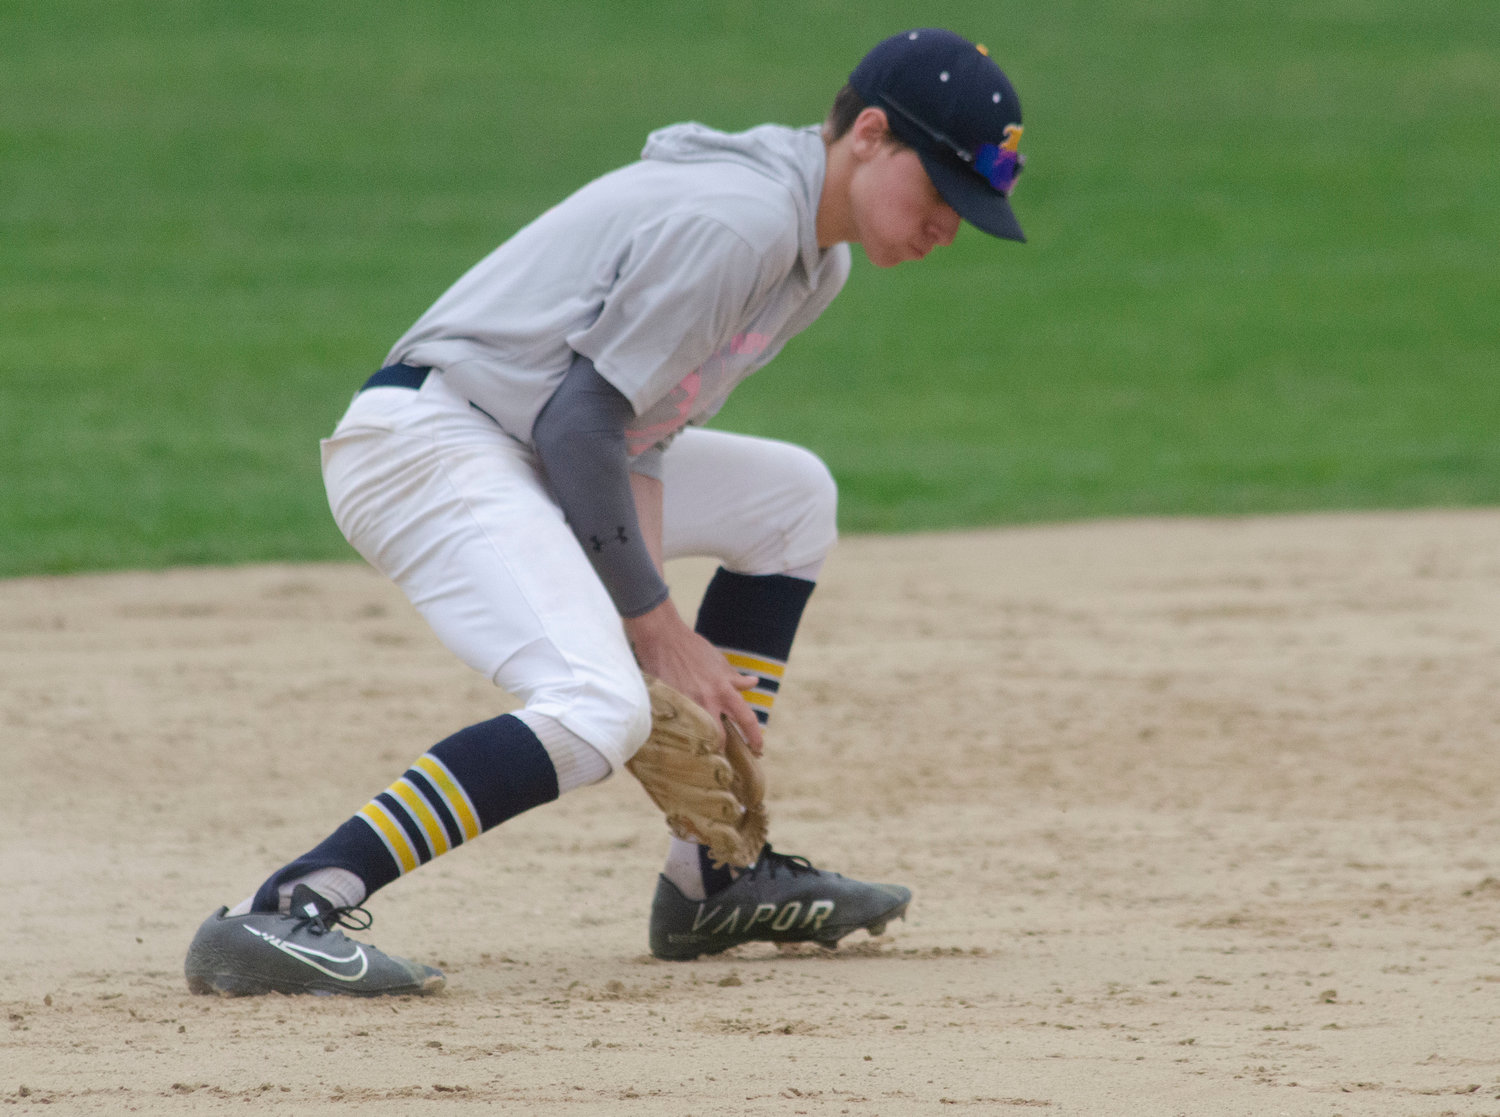 Barrington High School shortstop Gabe Tanous scoops up a grounder during Friday’s game against Mt. Hope. The two teams used the game as a fund-raiser for the Jimmy Fund, collecting more than $5,000 in donations.